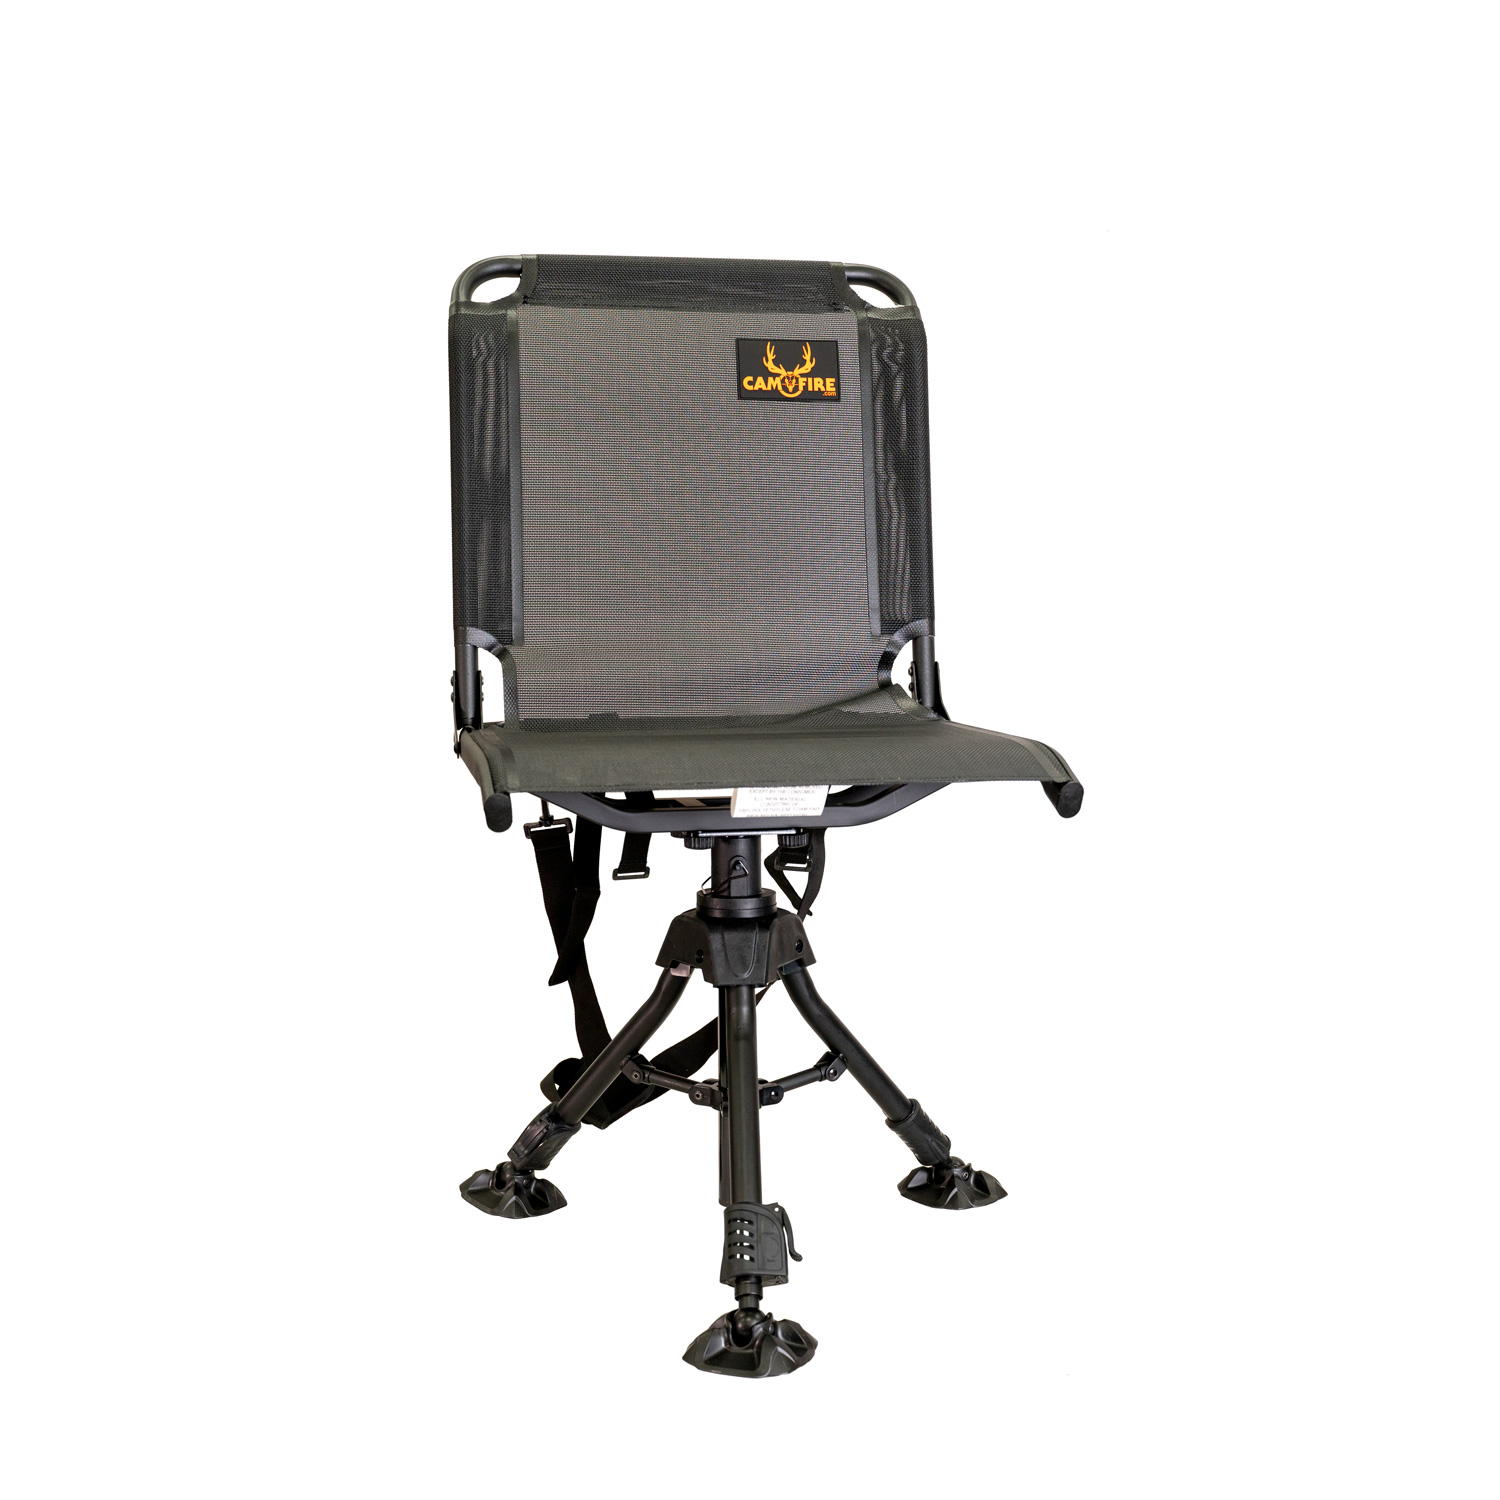 CAMOFIRE FINISHER GROUND BLIND CHAIR main photo.